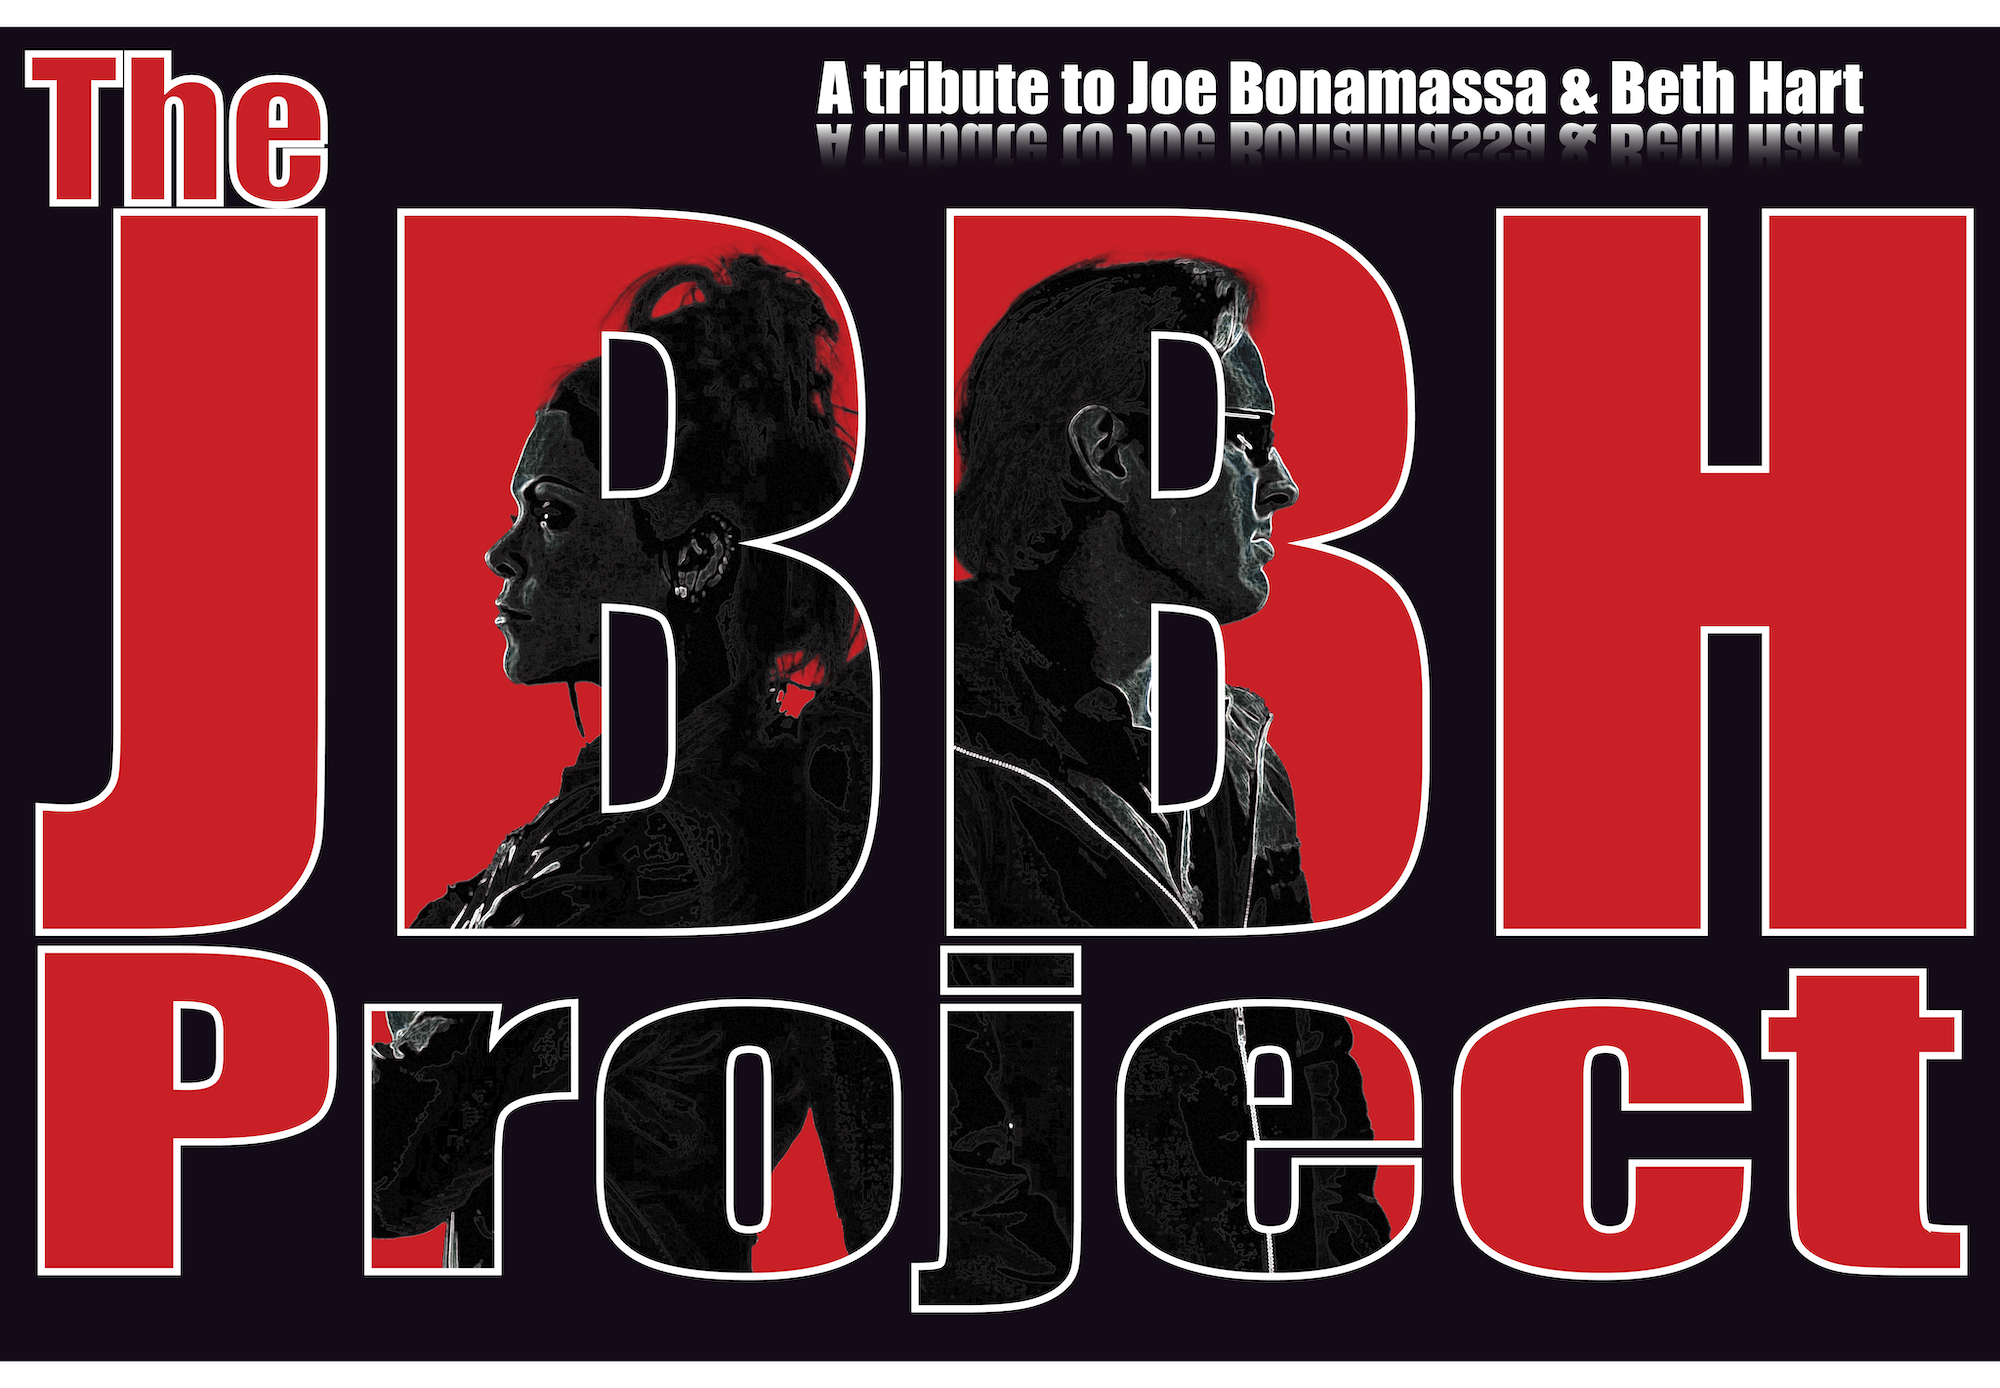 The JBBH project